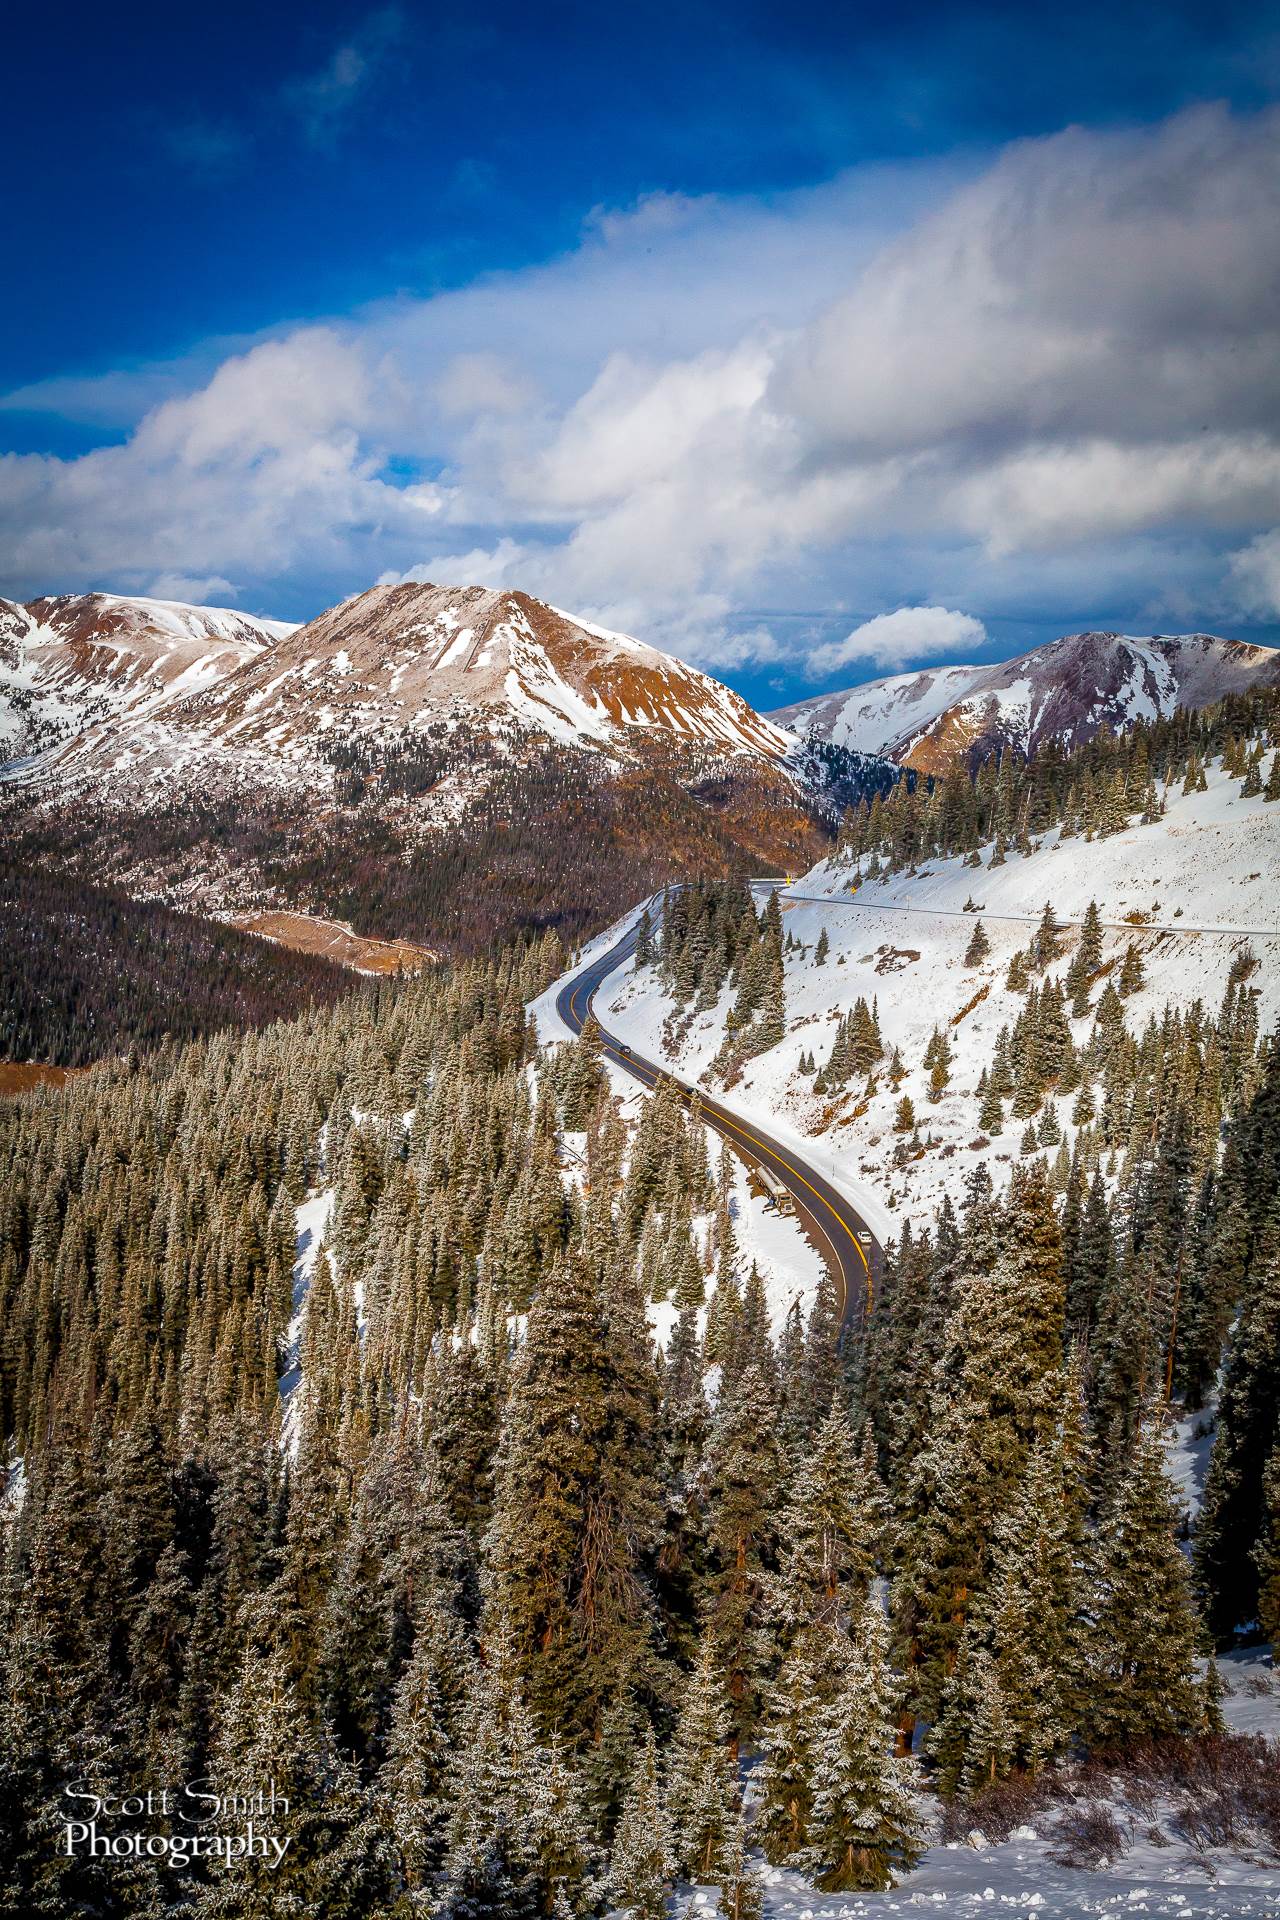 Loveland Pass Heading back home from A-basin via Loveland Pass after a day of snowboarding. by Scott Smith Photos